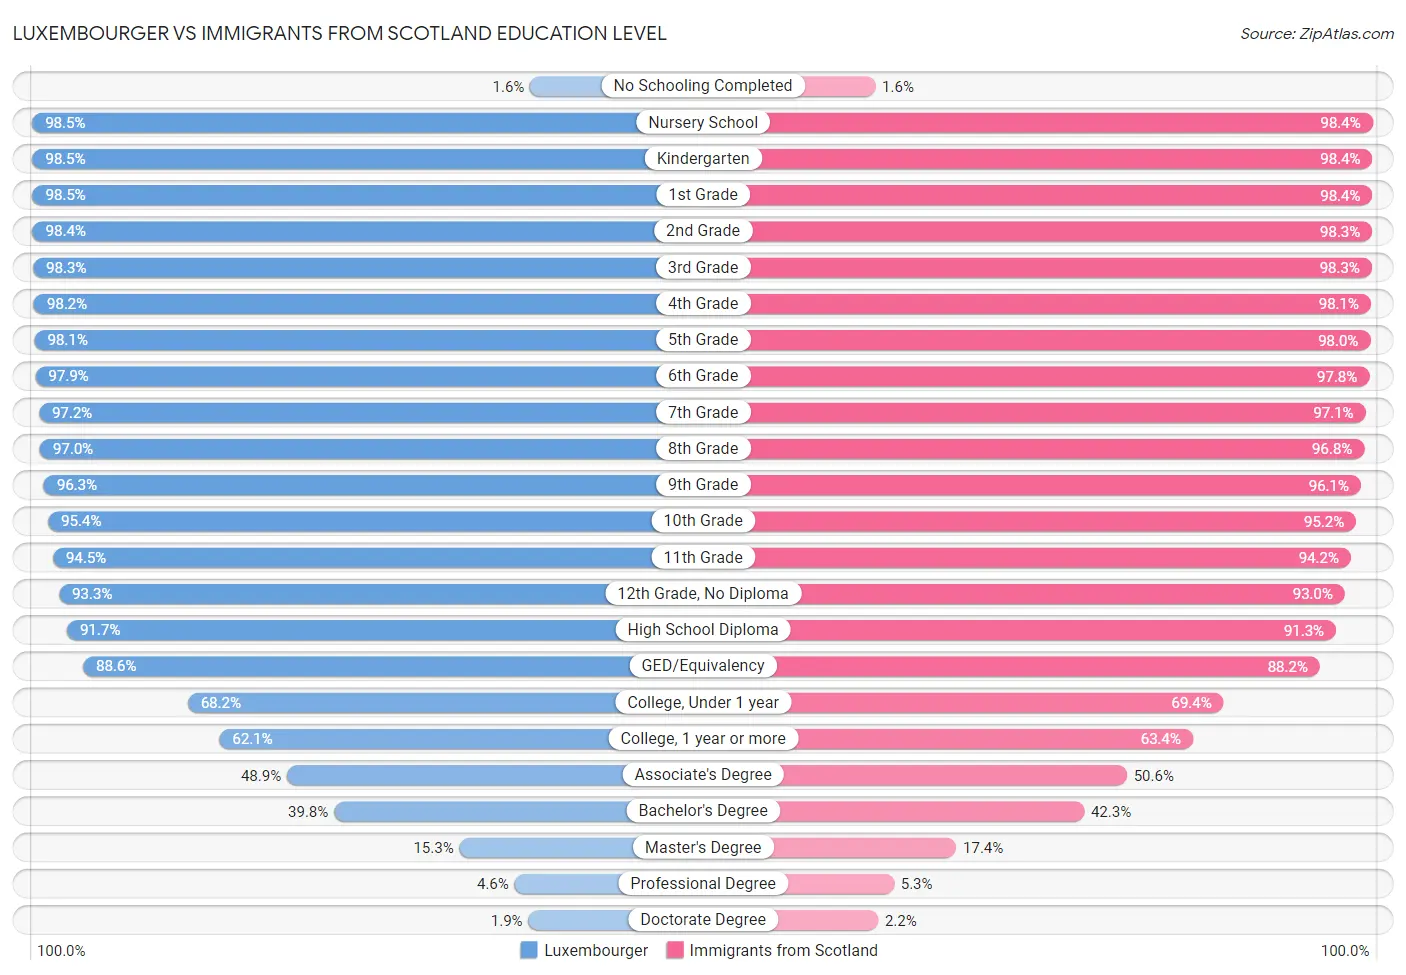 Luxembourger vs Immigrants from Scotland Education Level